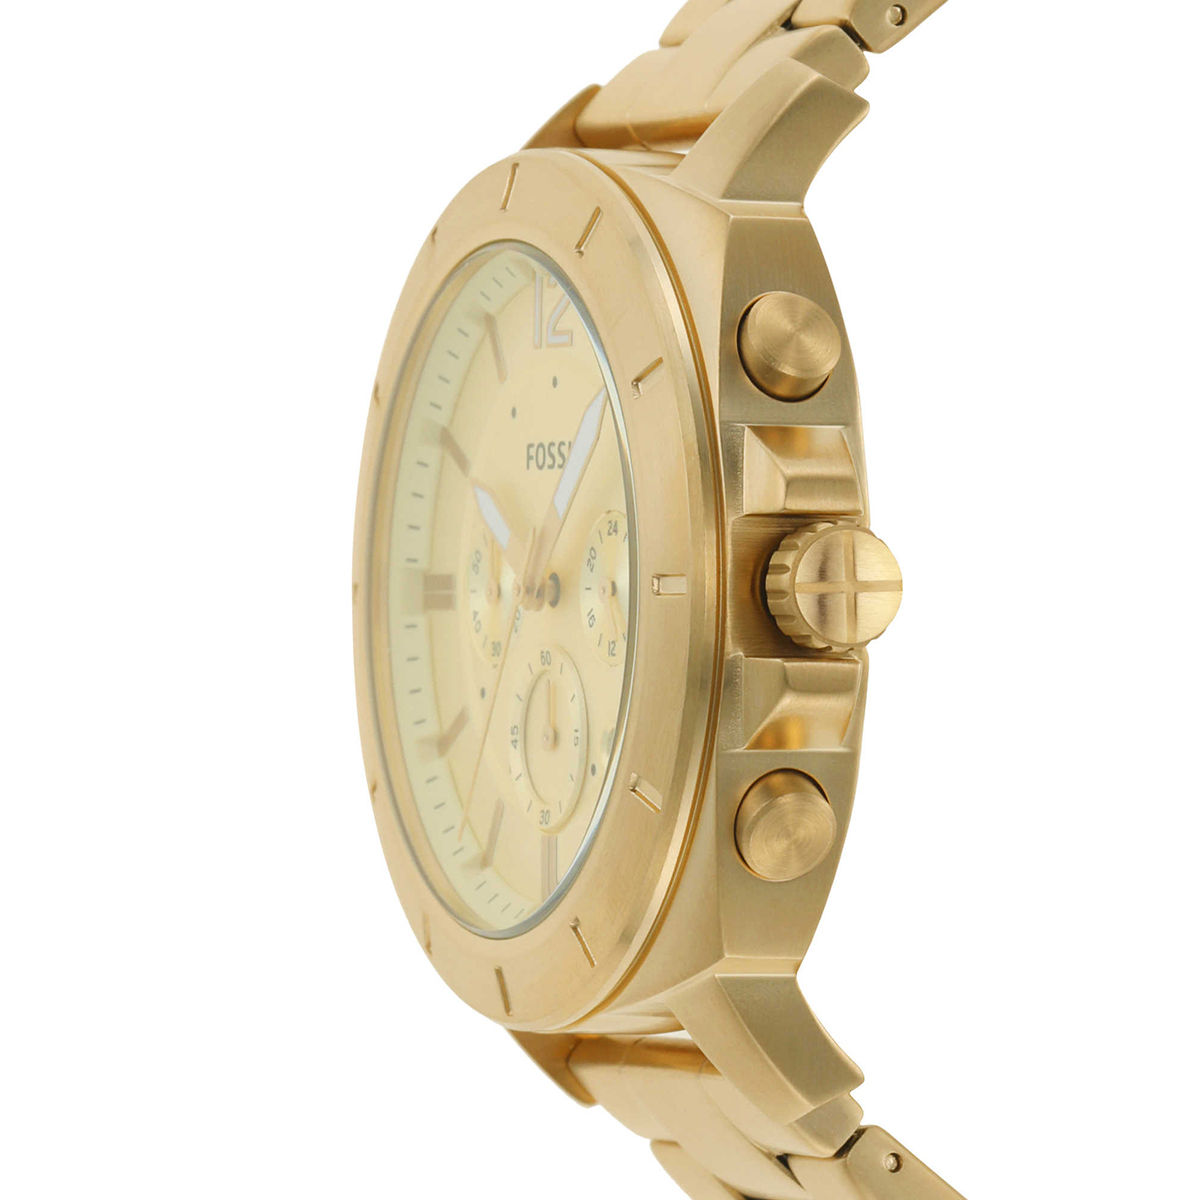 Fossil Privateer Sport Gold Watch BQ2694 (M): Buy Fossil Privateer